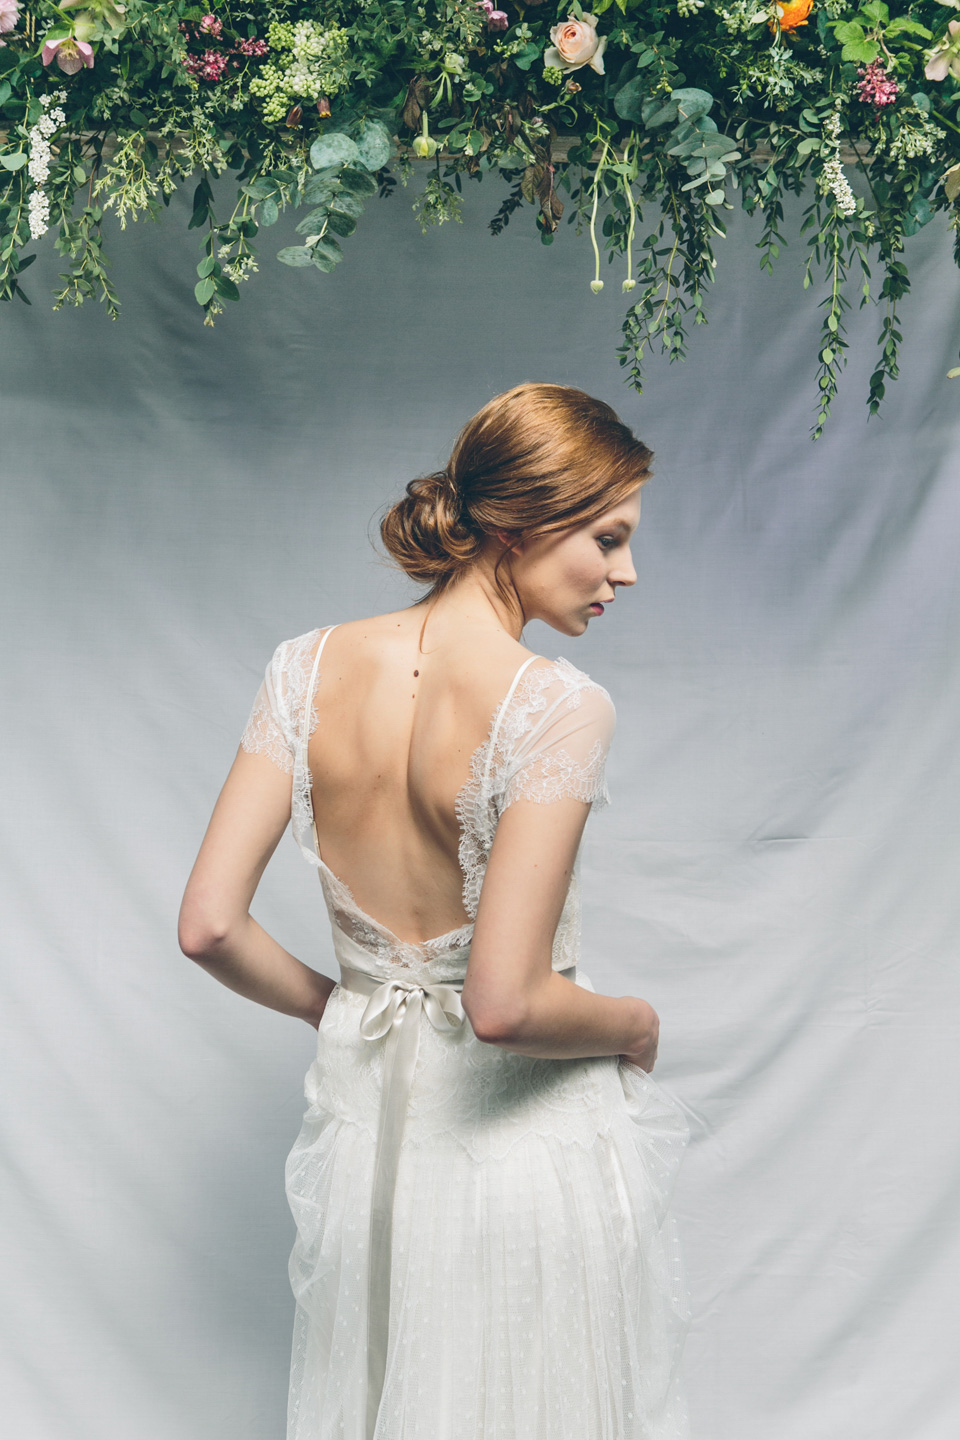 Kate Beaumont is a Sheffield based designer & Maker Of Elegant Wedding Gowns With A Vintage Twist. Visit kate-beaumont.co.uk.